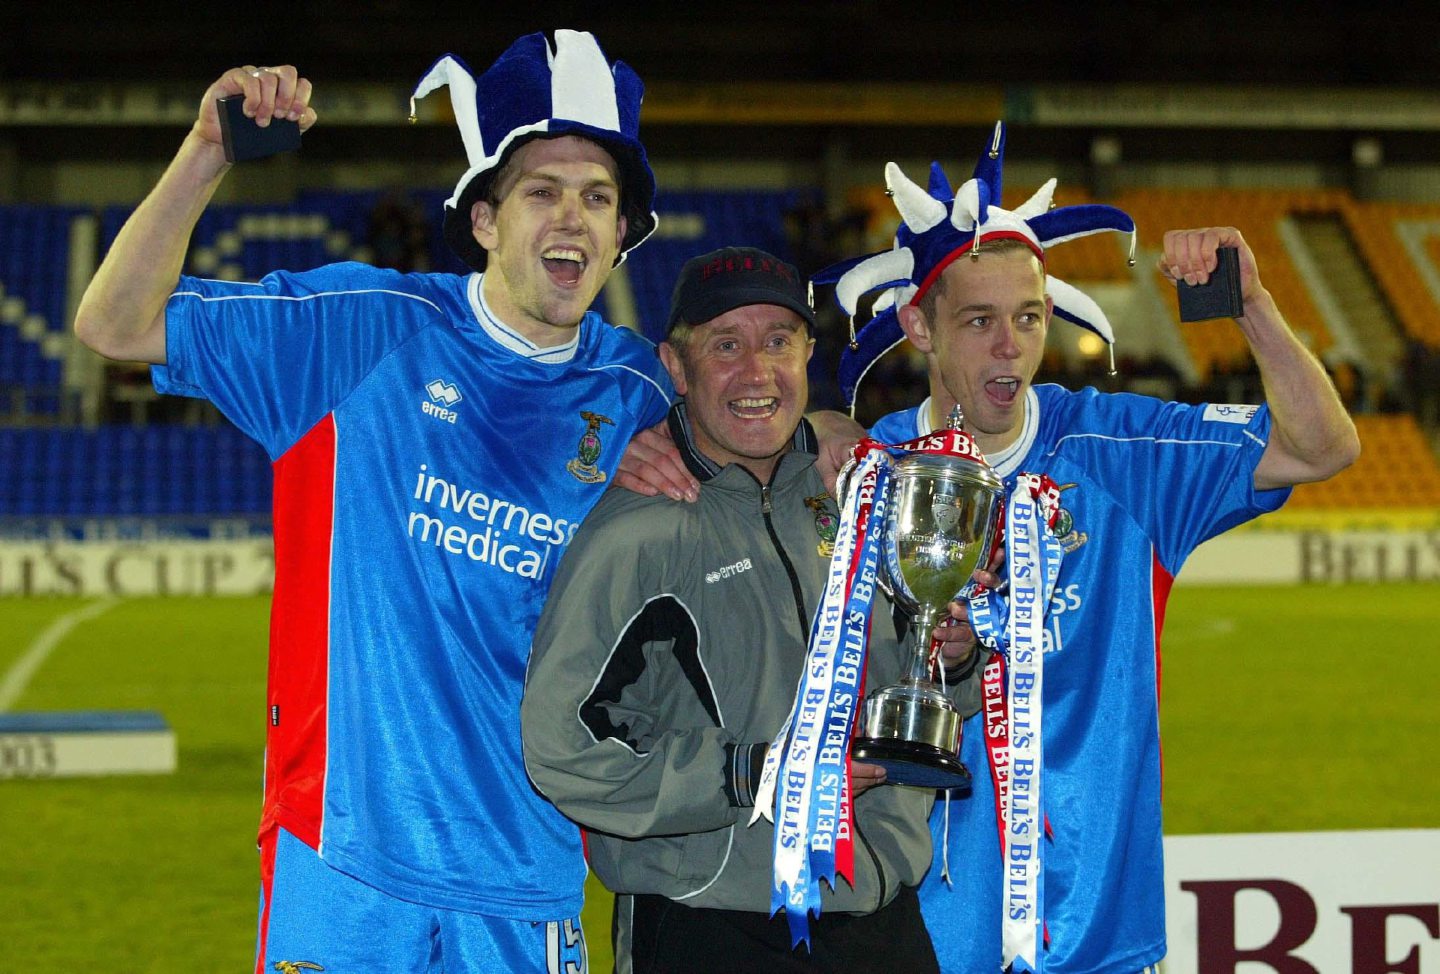 The former Inverness manager John Robertson with goalscorers Steven Hislop and David Bingham after Caley Thistle beat Airdrie United to win the Challenge Cup in 2003.